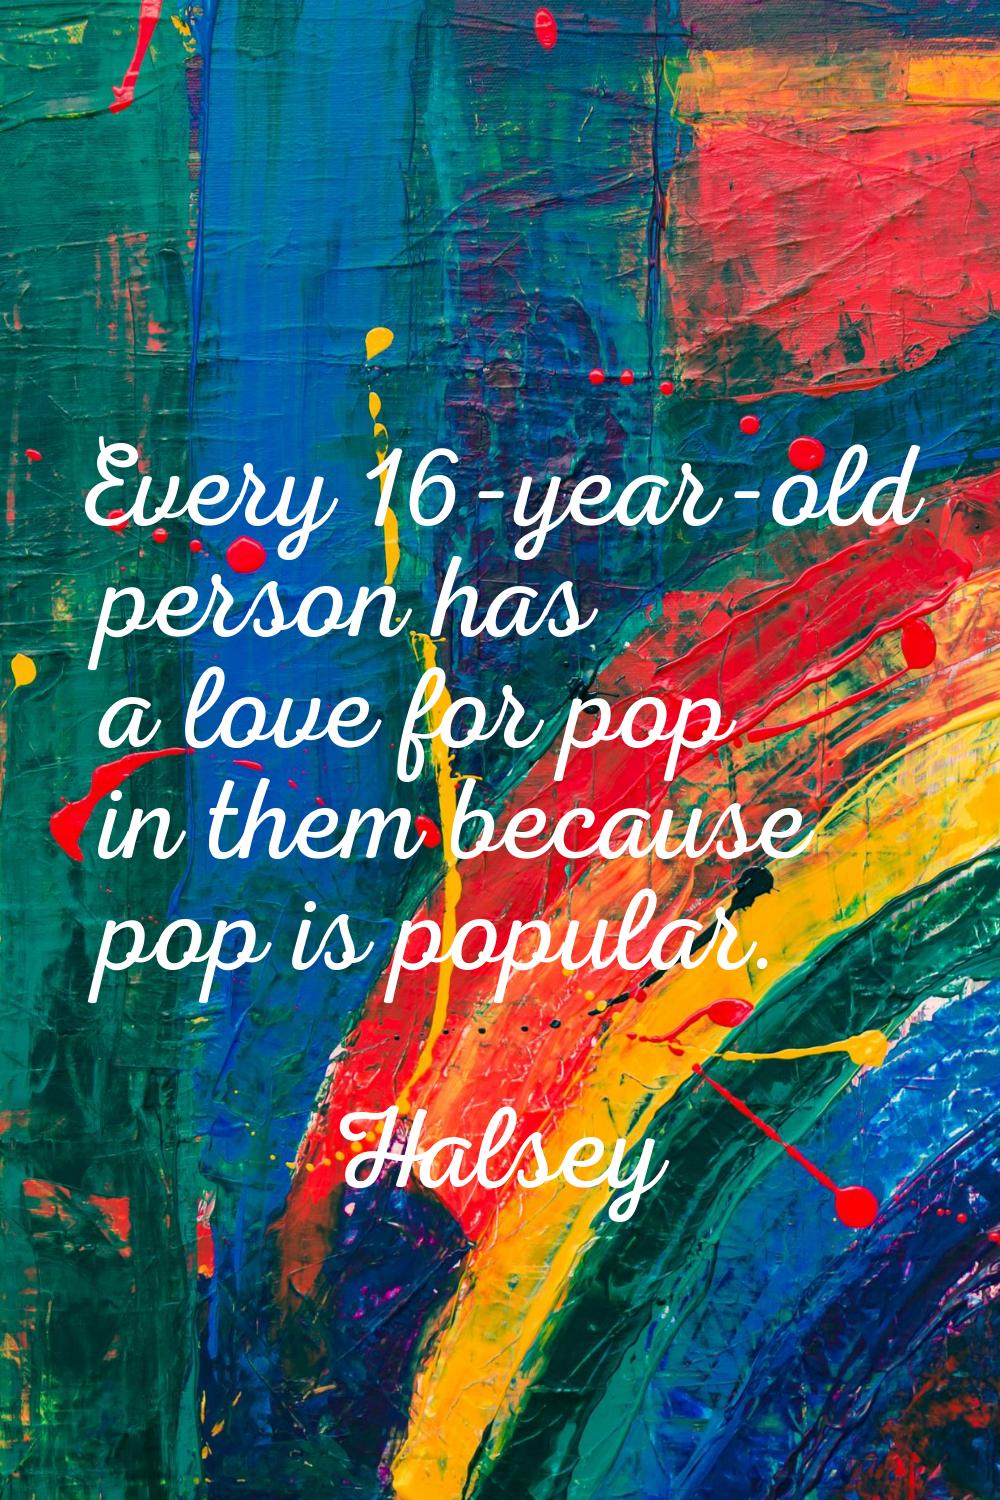 Every 16-year-old person has a love for pop in them because pop is popular.